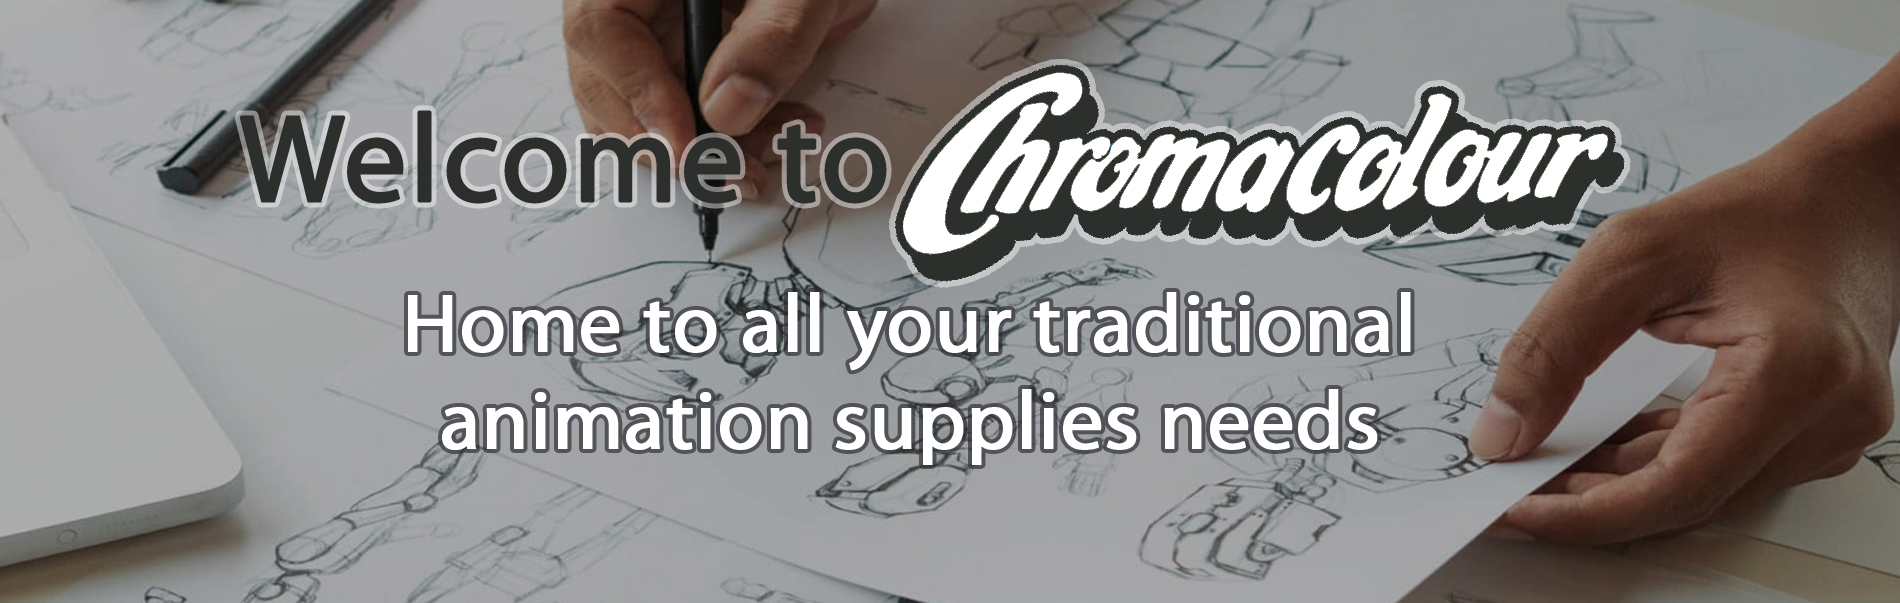 Welcome to Chromacolour - home of all your traditional animation supplies needs